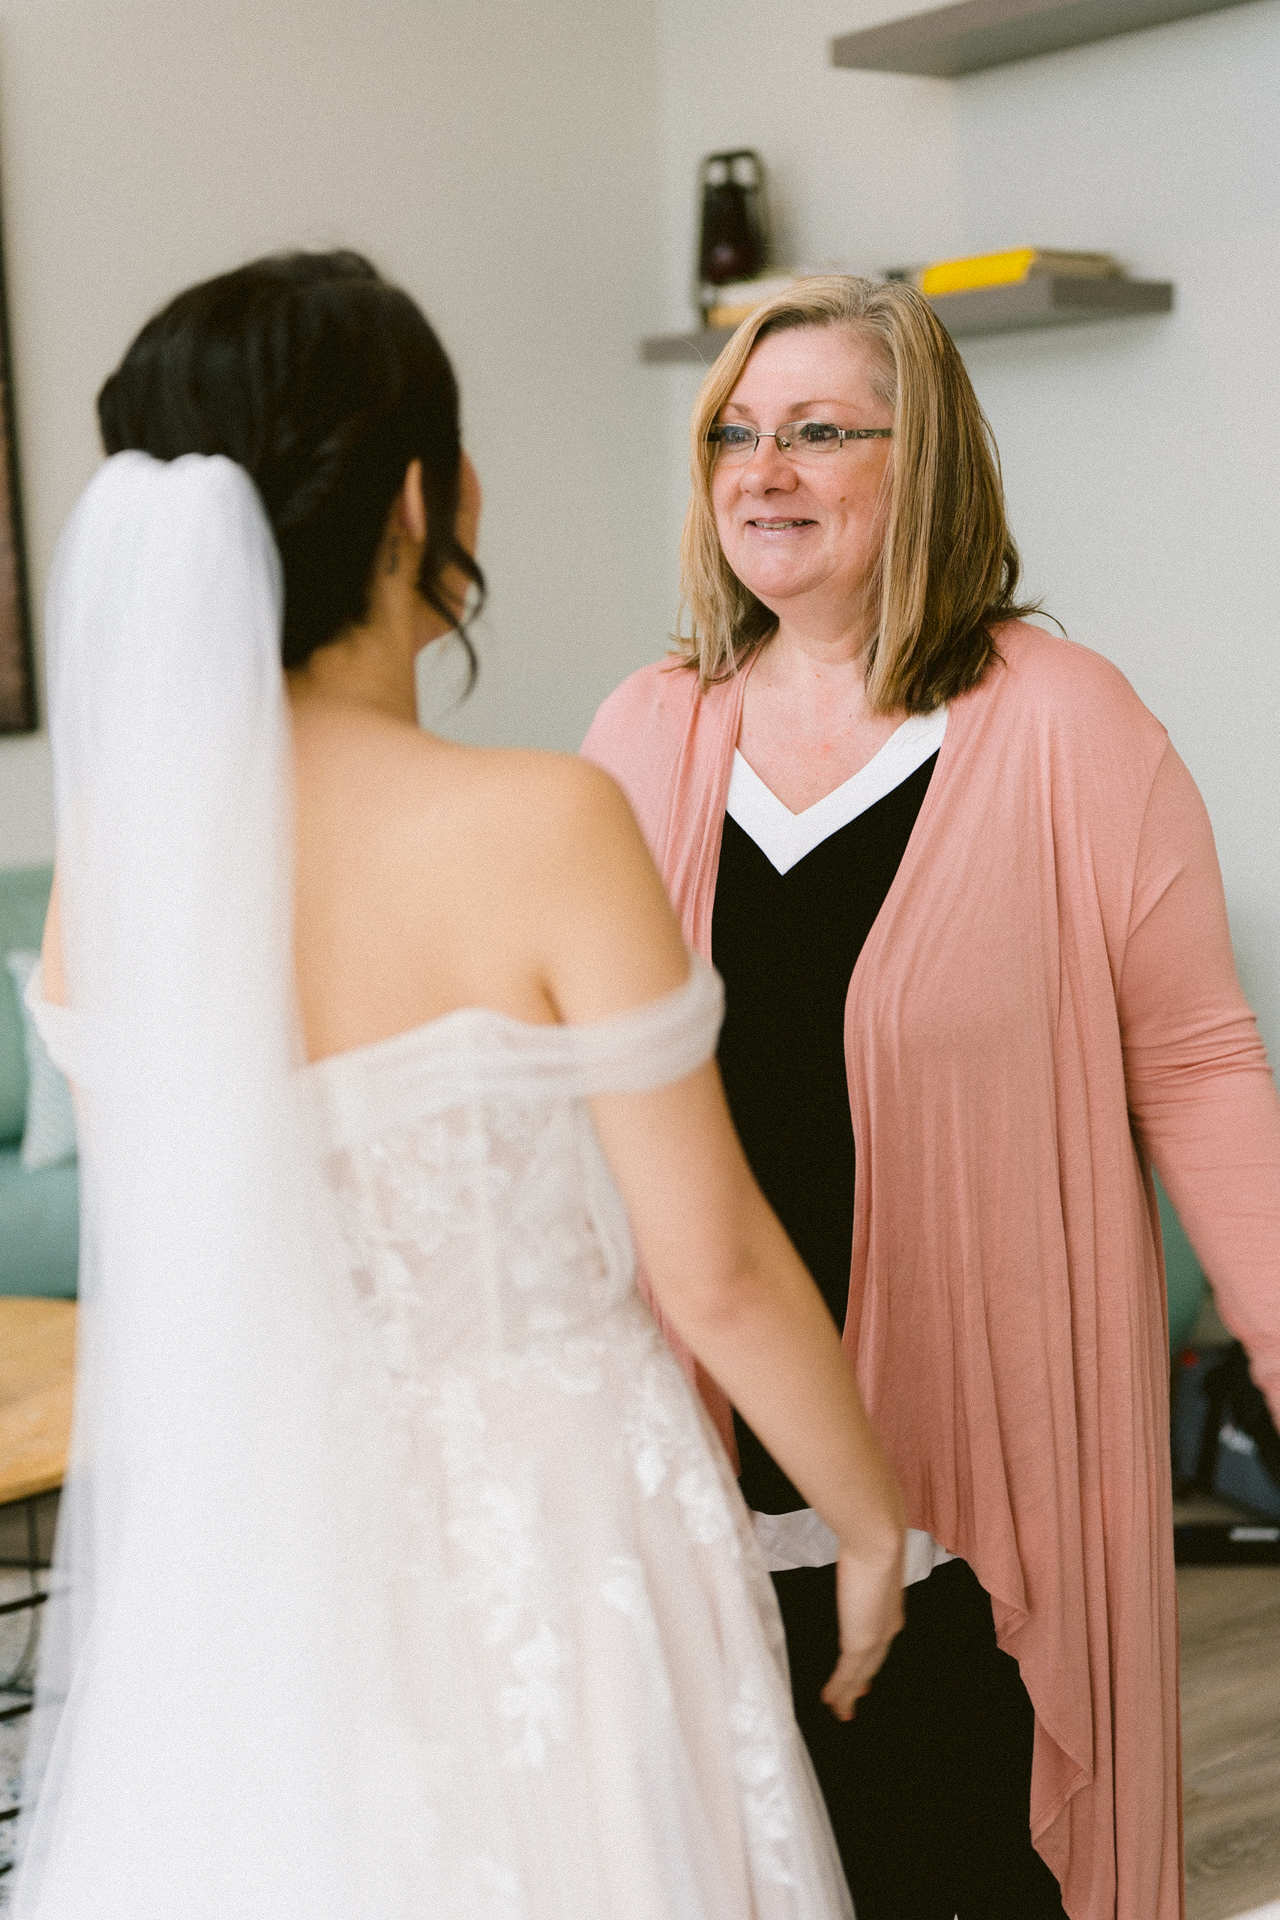 A bride in her wedding dress facing a smiling woman, likely a relative or friend, in a living room setting